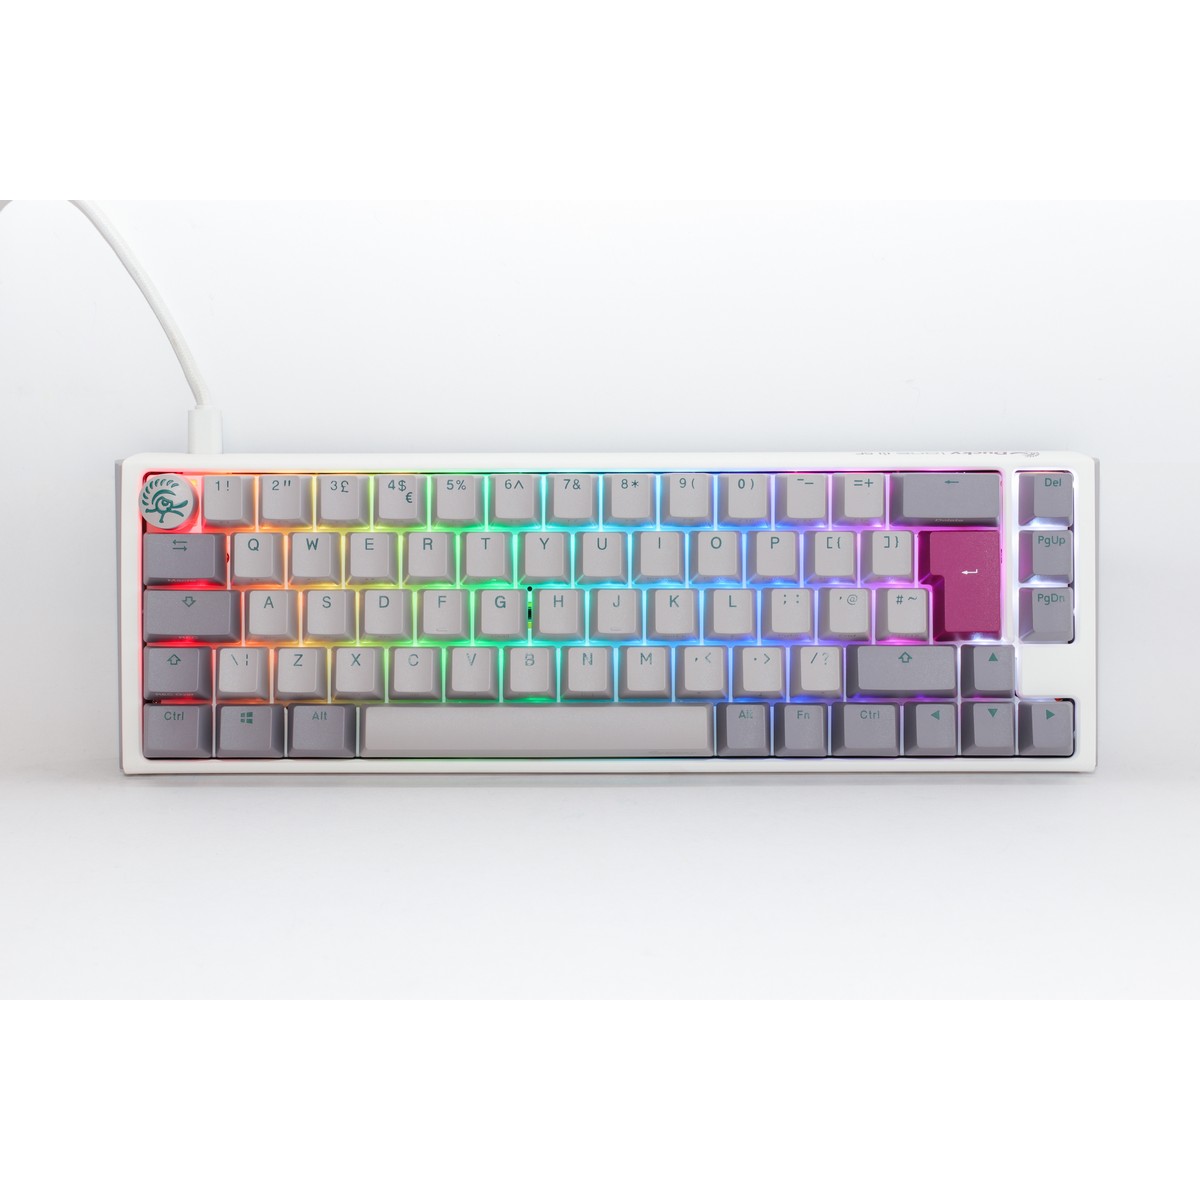 Ducky - Ducky One 3 Mist SF 65% USB RGB Mechanical Gaming Keyboard Cherry MX Silent Red Switch - UK Layout